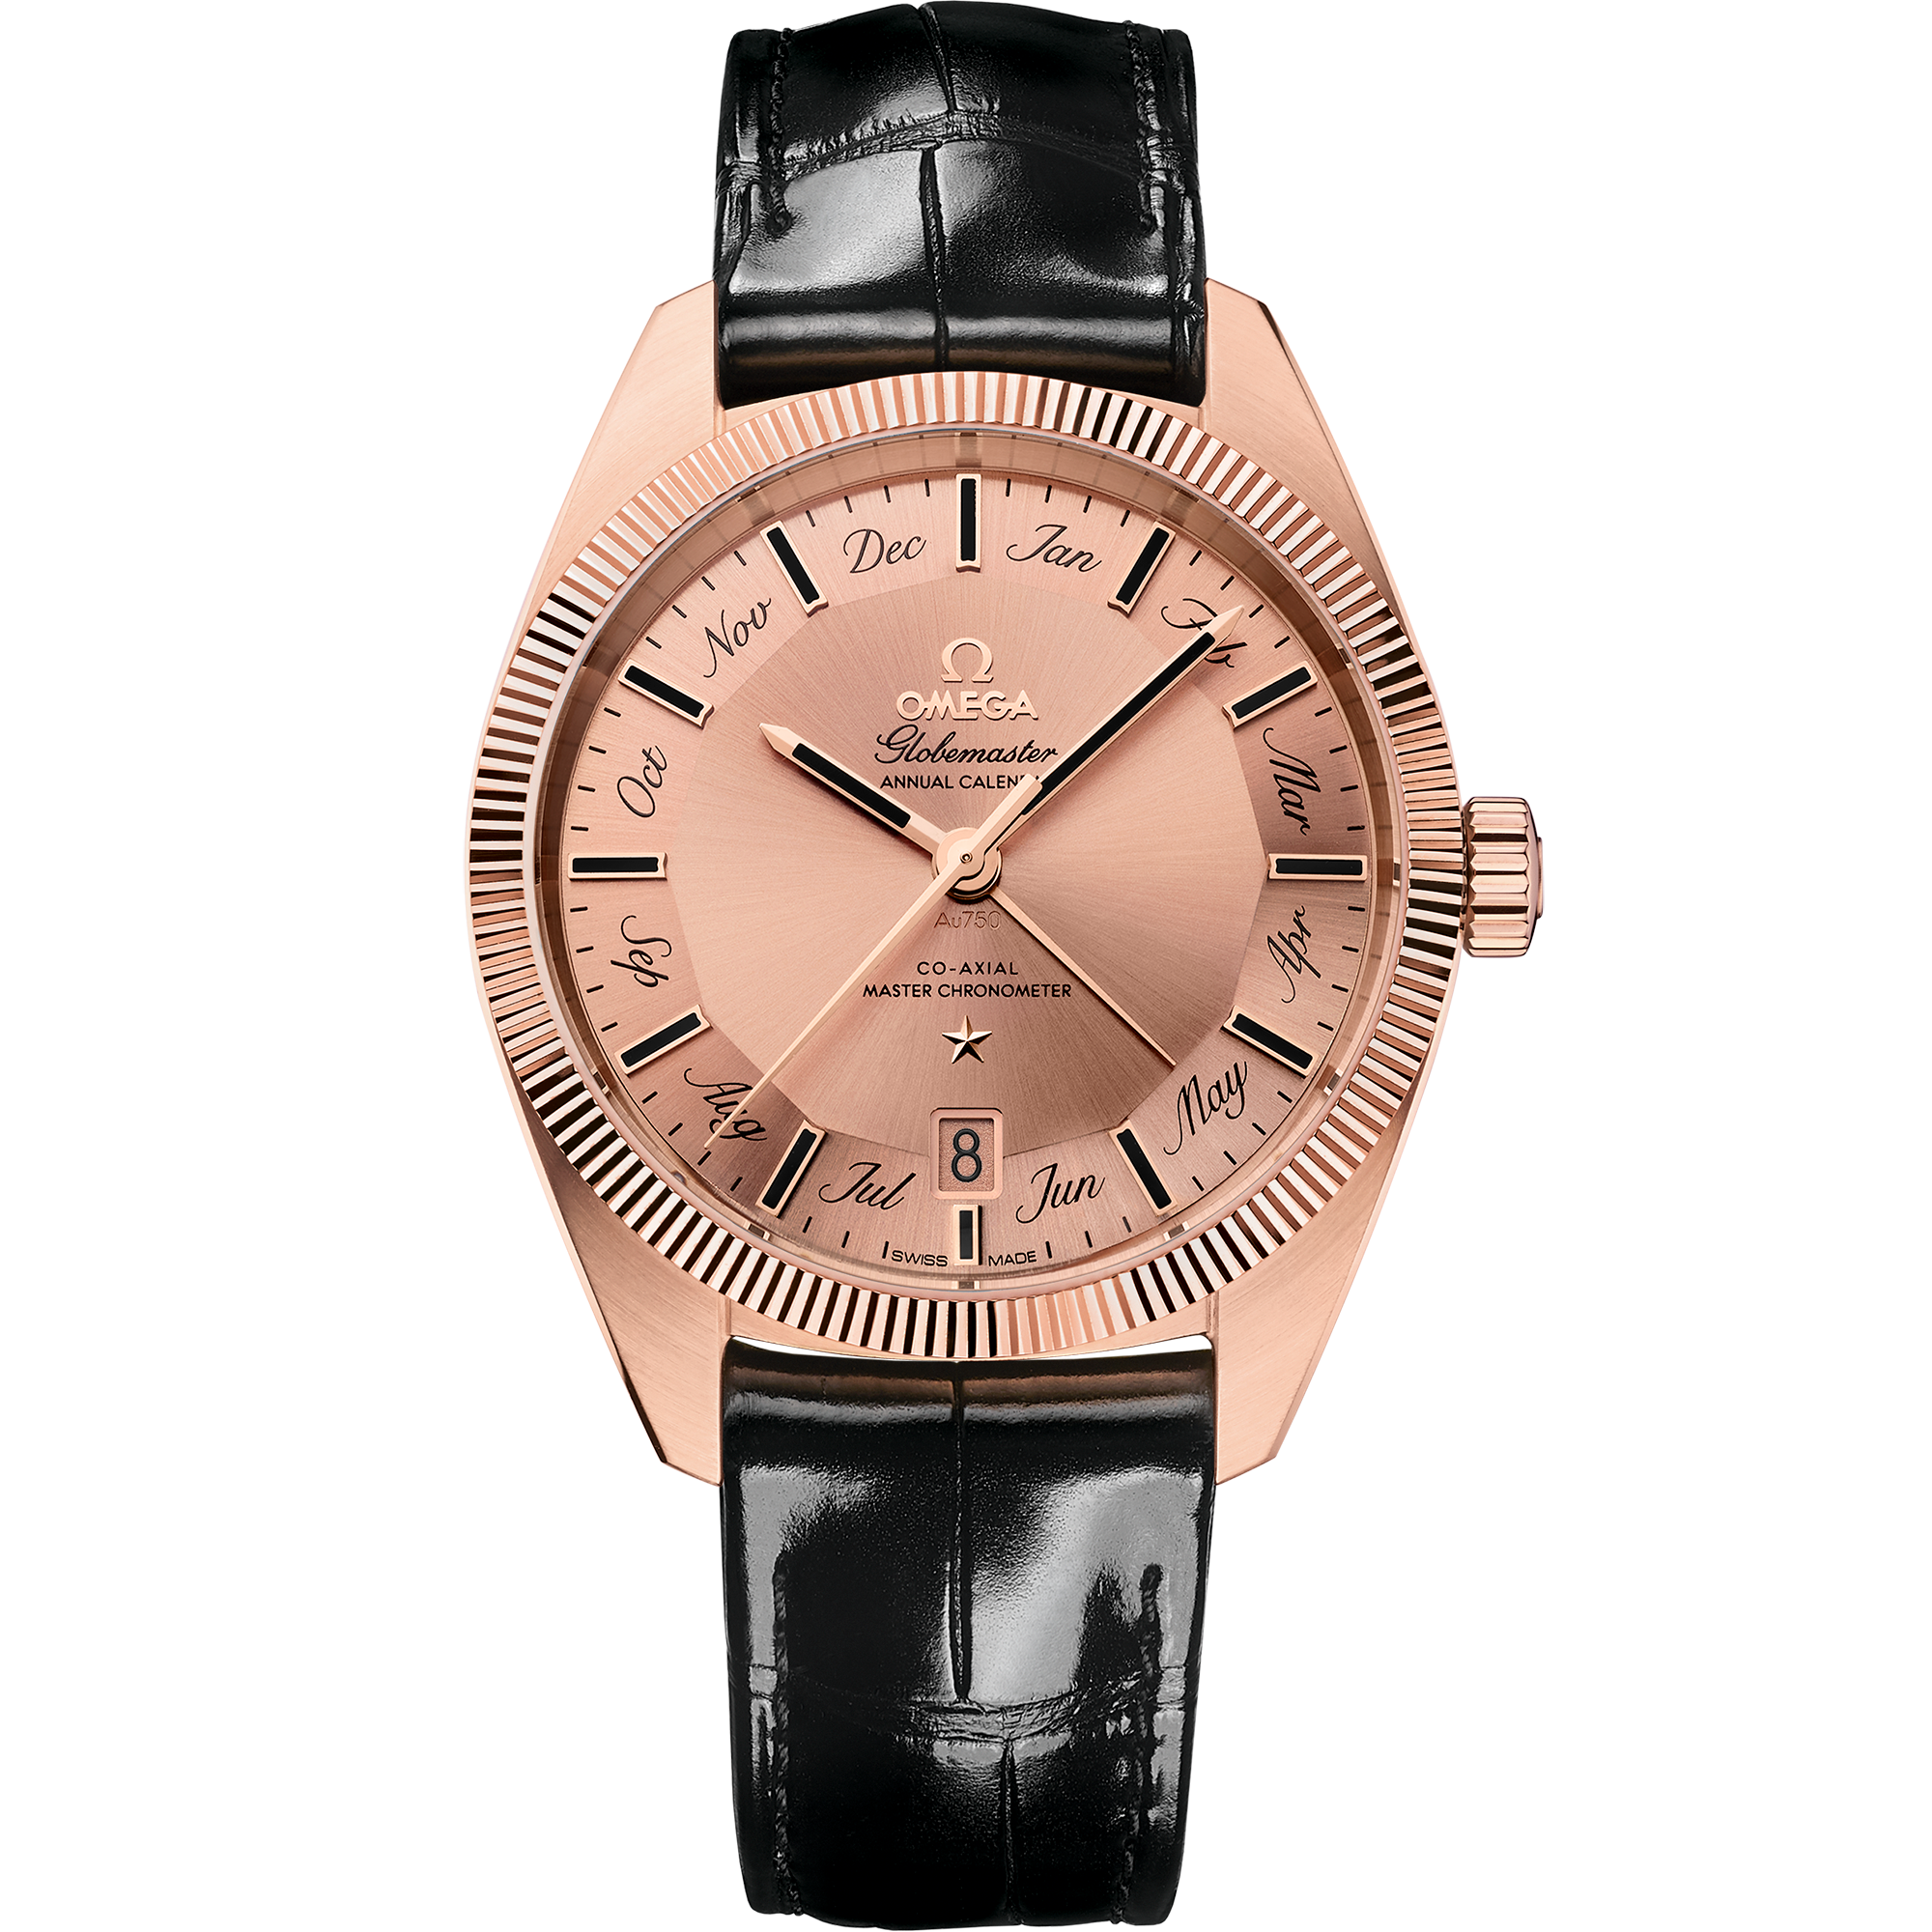 Constellation 41 mm, Sedna™ gold on leather strap - 13053412299002